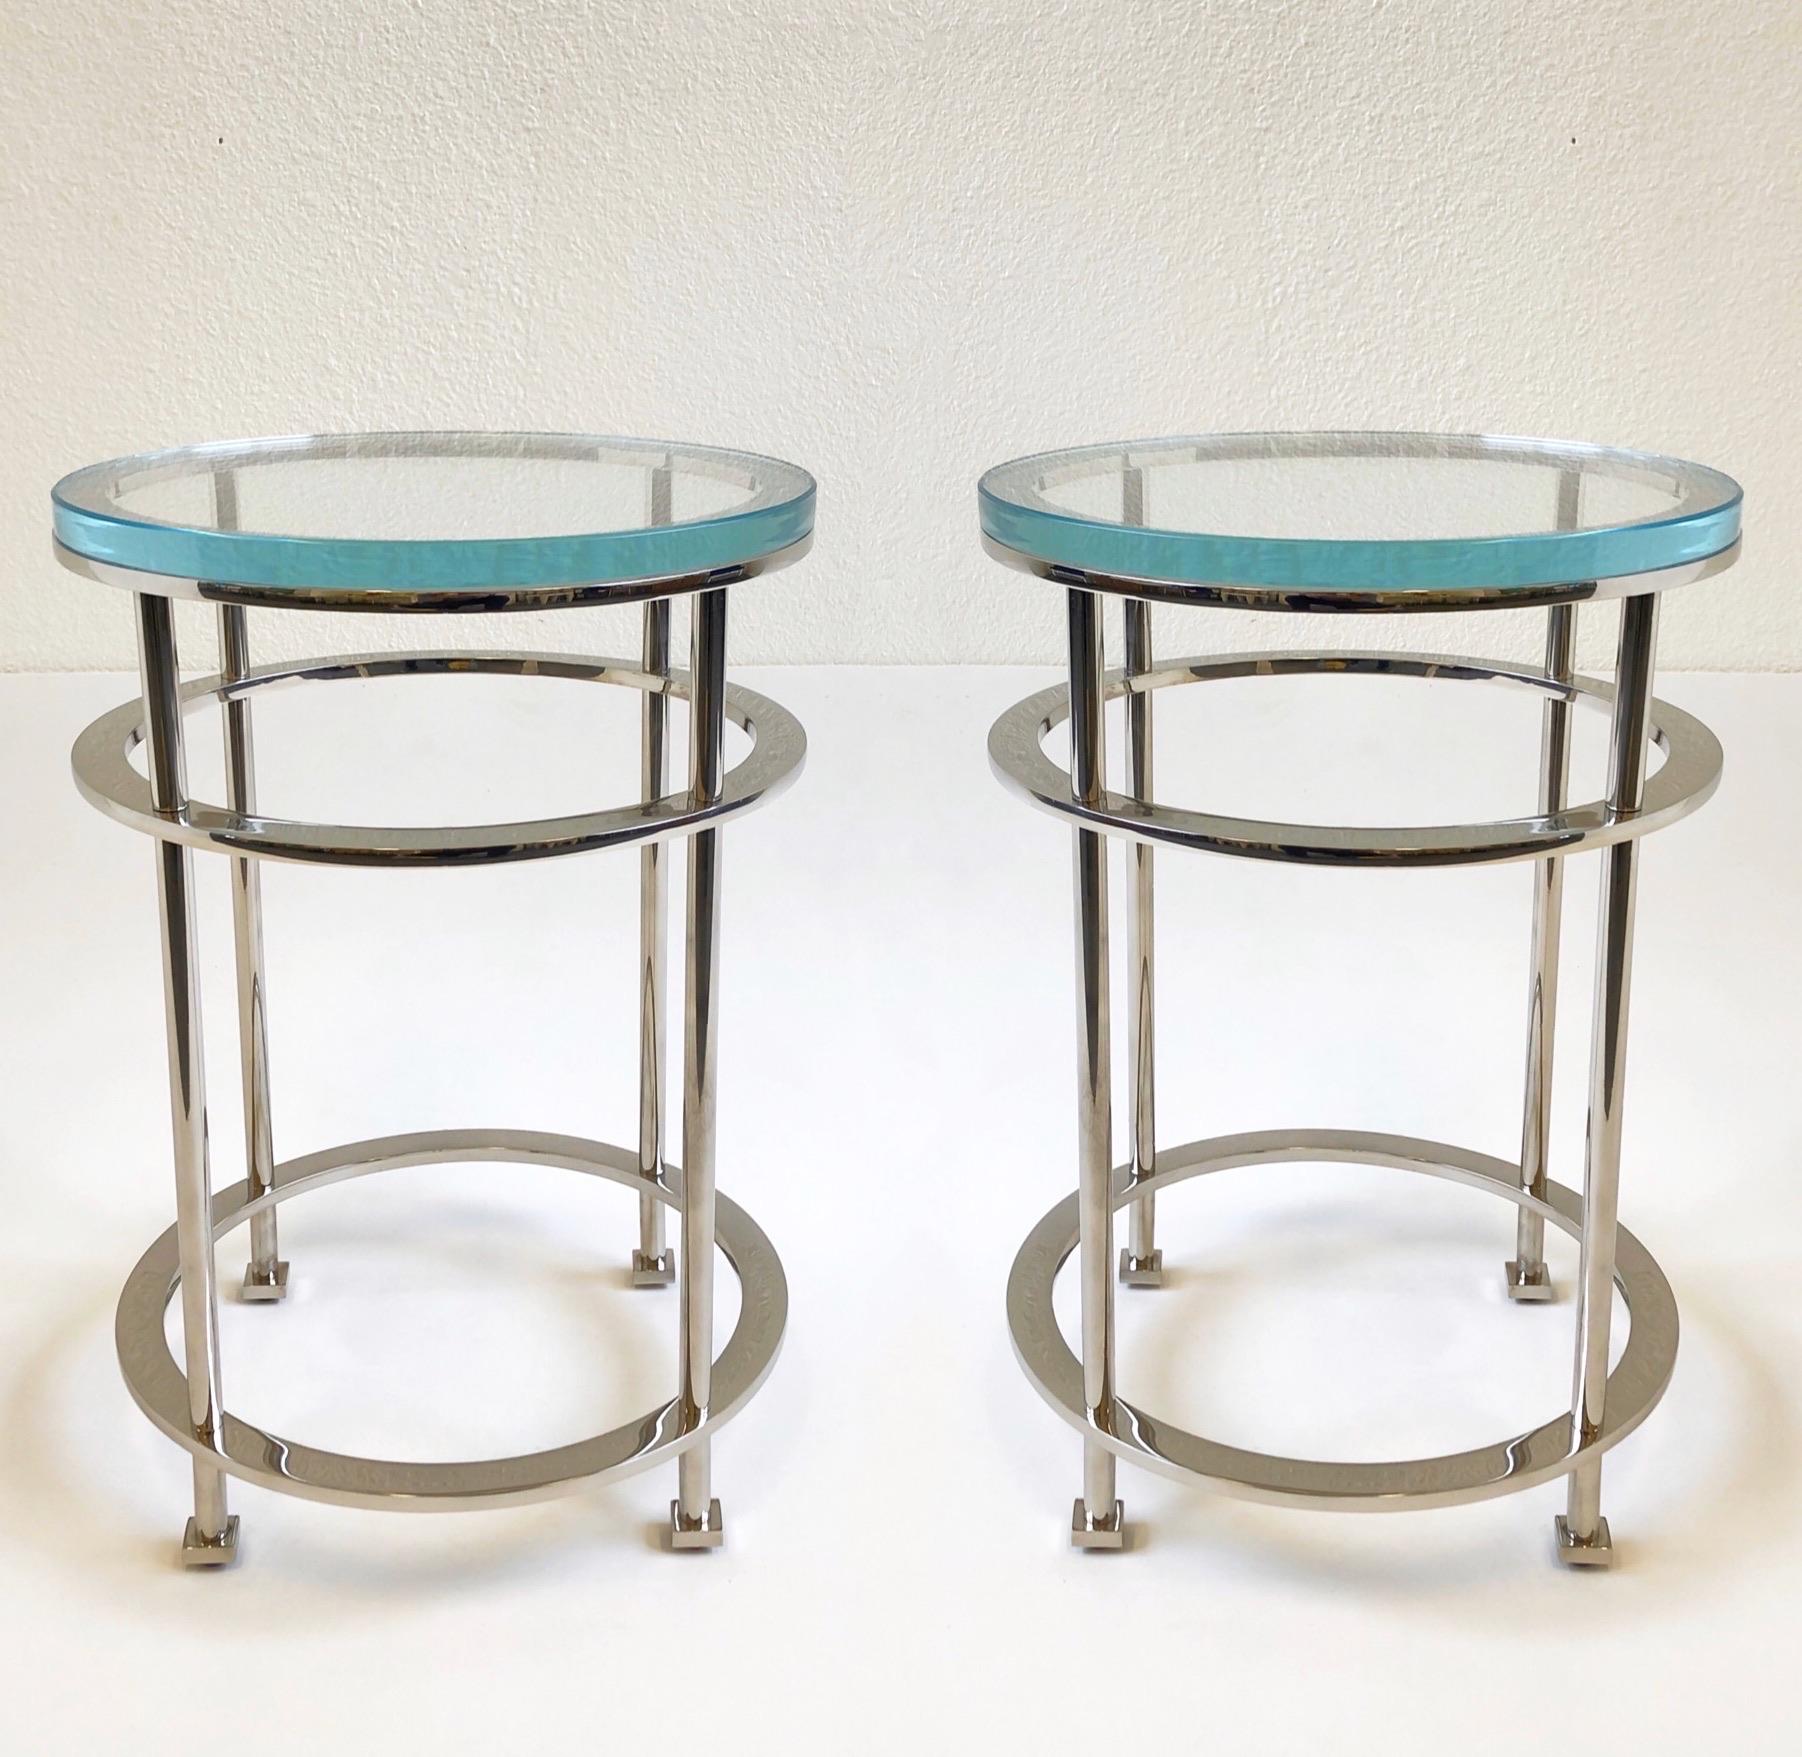 Pair of Nickel and Lucite Side Tables by Jean Michel Wilmotte for Mirak 9